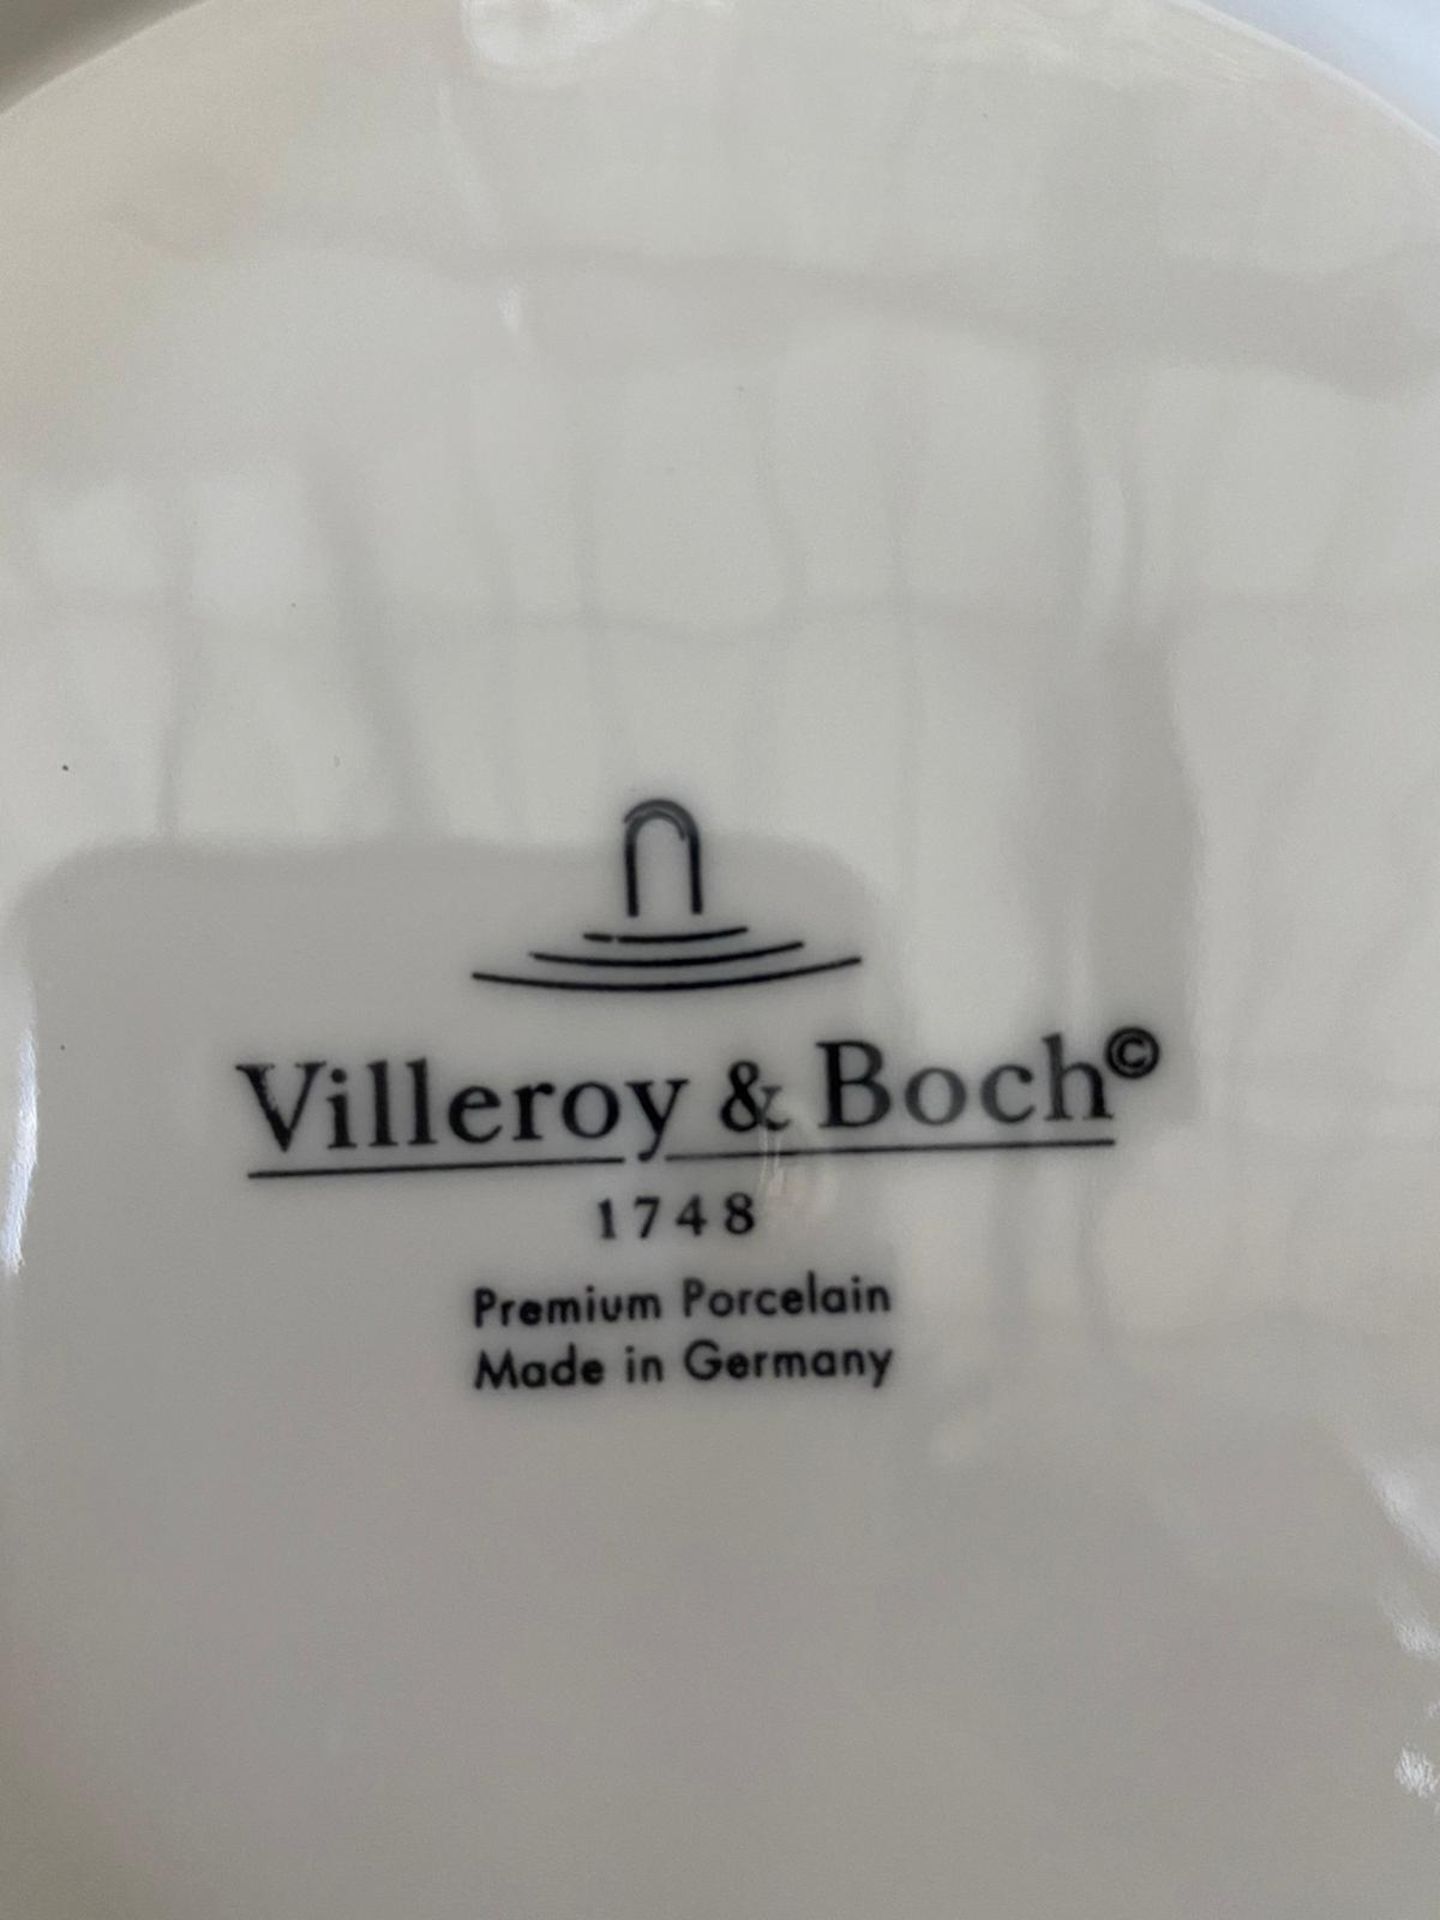 6 x Villeroy & Boch Royal Dinner Plate -290mm (29cm) - Ref: 1044122620 - New and boxed - CL011 - - Image 3 of 5